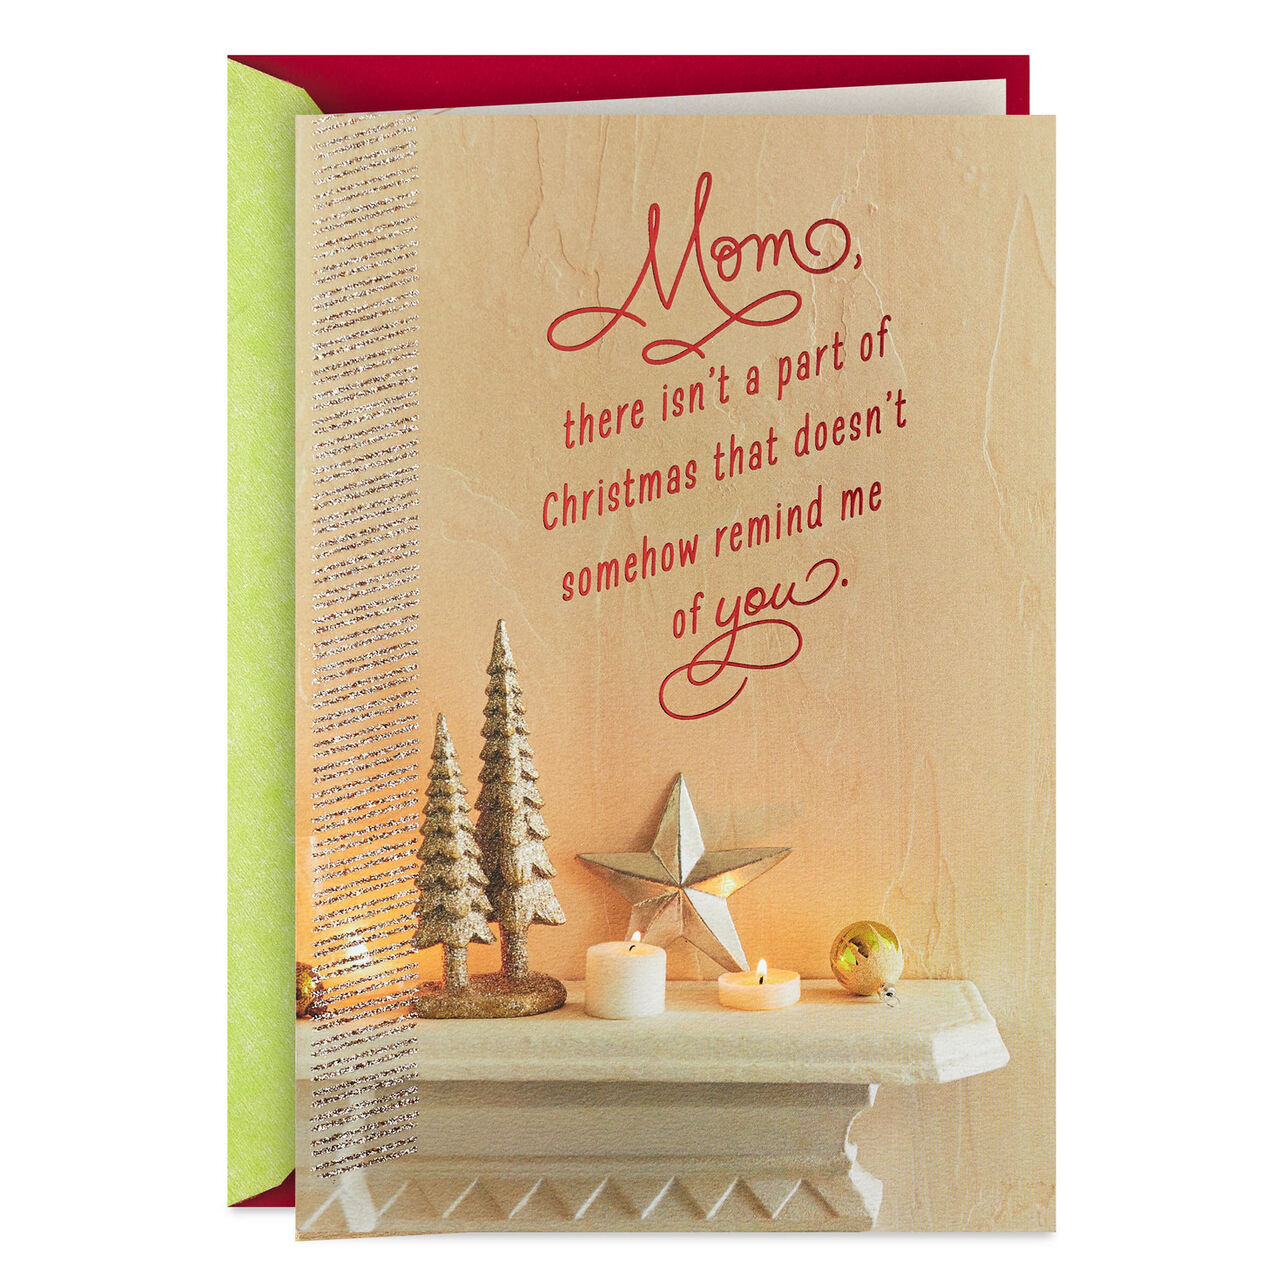 https://www.hallmarkbusiness.com/dw/image/v2/AALB_PRD/on/demandware.static/-/Sites-hallmark-master/default/dw5ce443e2/images/finished-goods/products/399XZH2864/Holiday-Mantle-Mom-Christmas-Card_399XZH2864_01.jpg?sw=1280&sh=1280&sm=fit